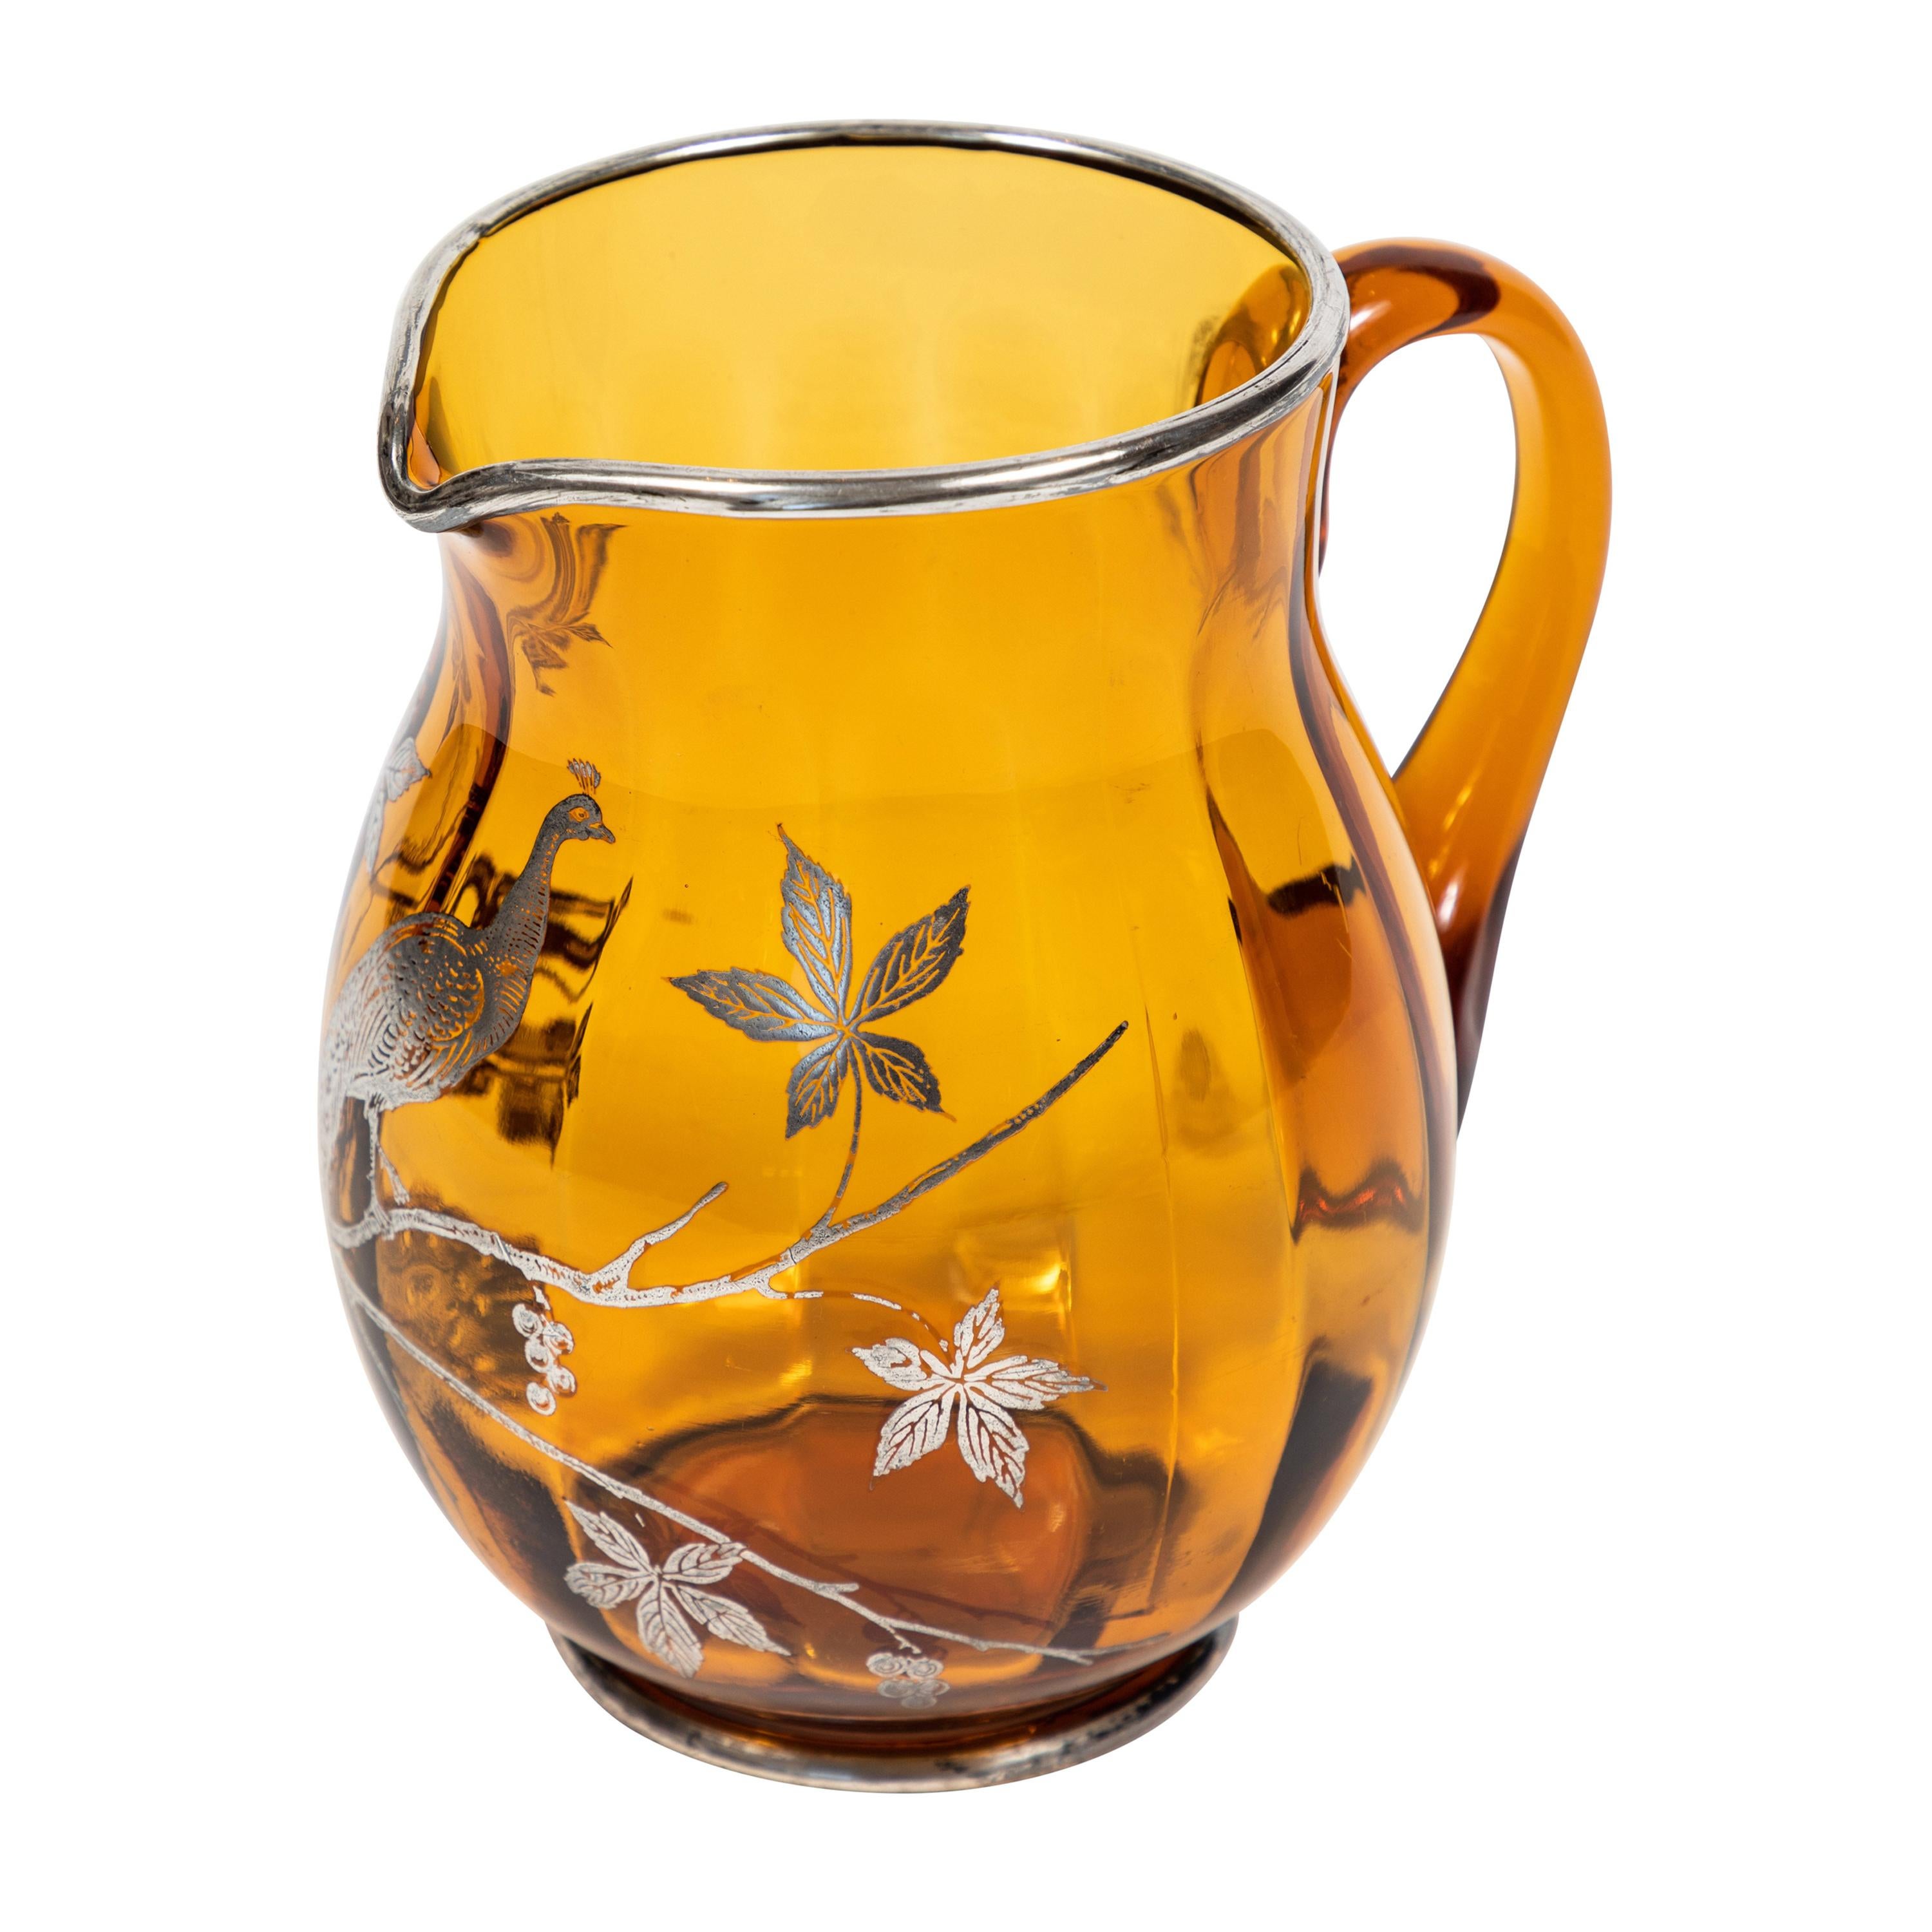 Vintage Amber Glass Pitcher with Sterling Silver Overlay